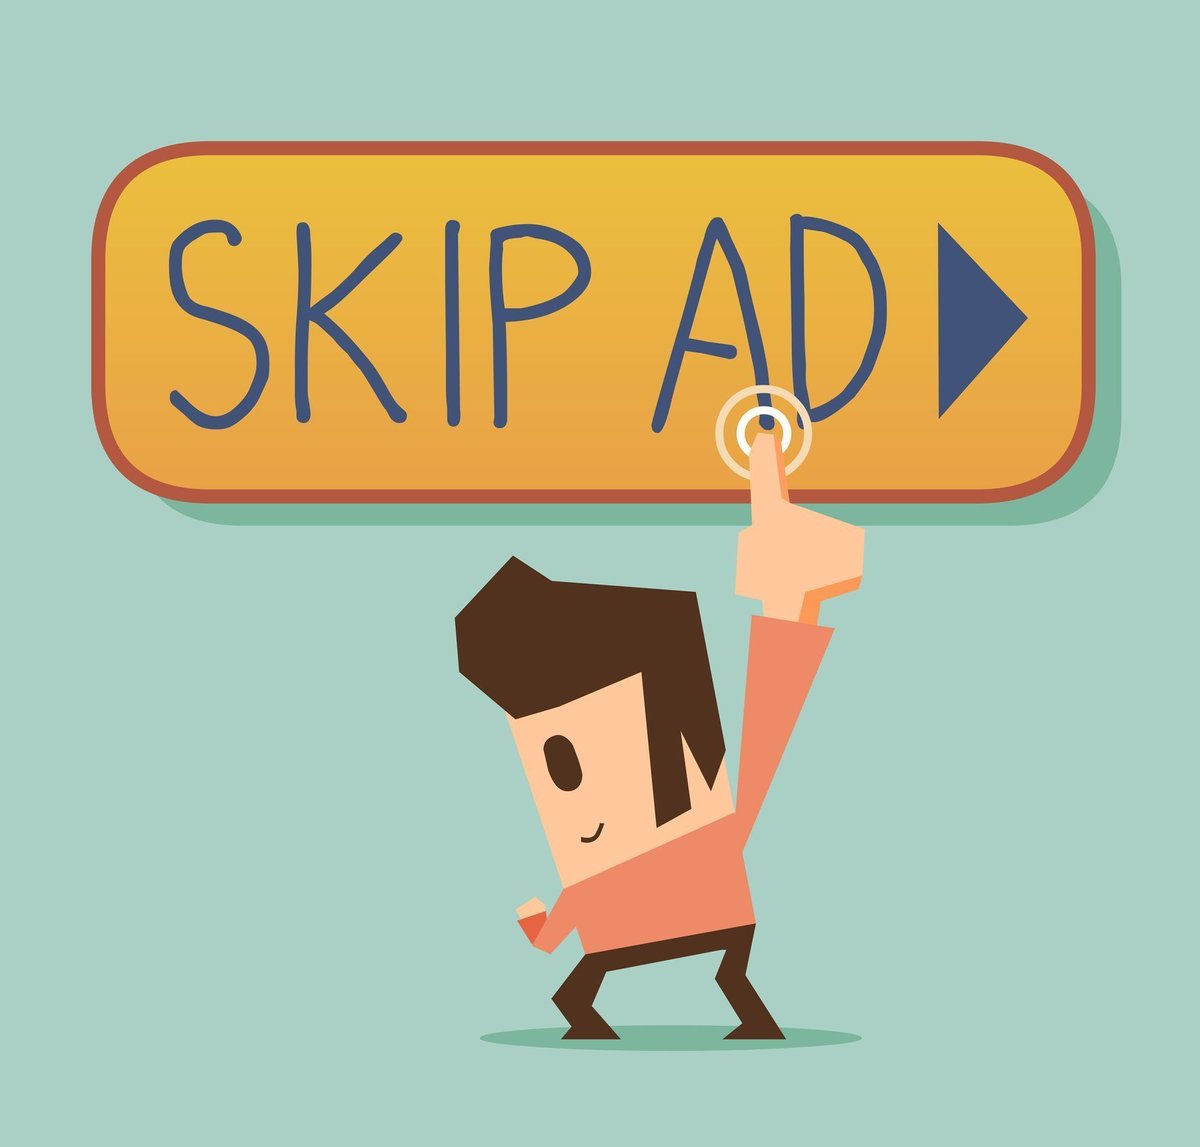 How Effective Are Your Online Paid Ads Really? [Infographic]